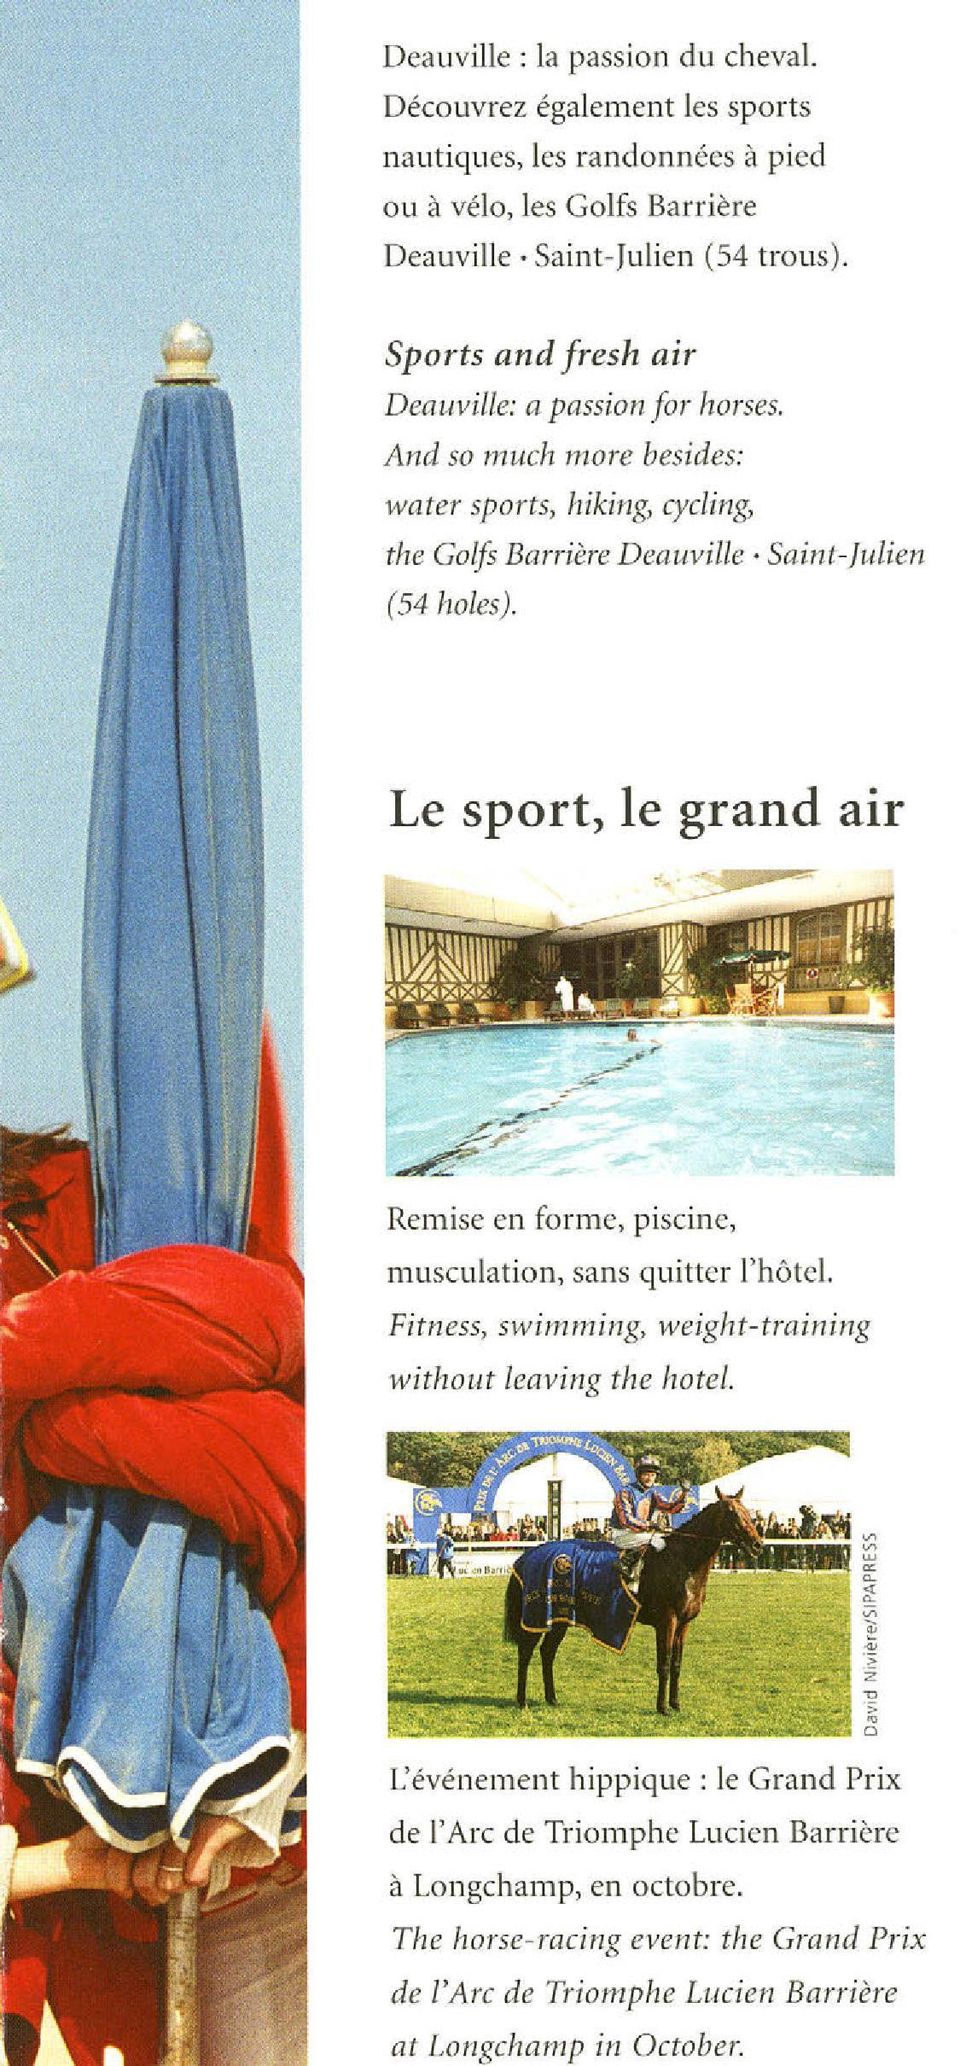 And so much more besides: water sports, hiking, cycling, the Golfs Barrière Deauville- Saint-Julien (54 holes).